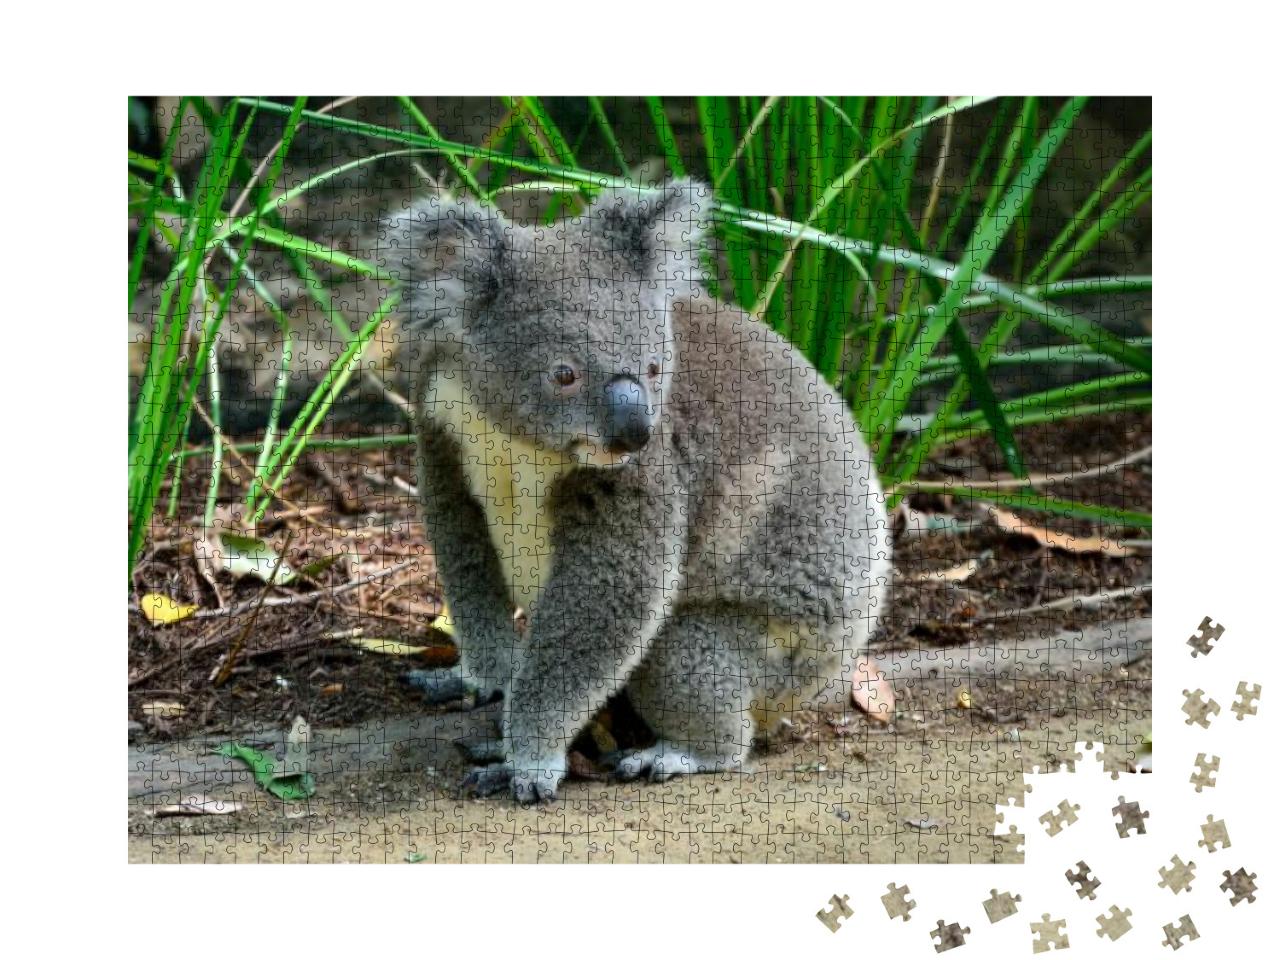 Koala Sitting on the Ground in Queensland, Australia... Jigsaw Puzzle with 1000 pieces